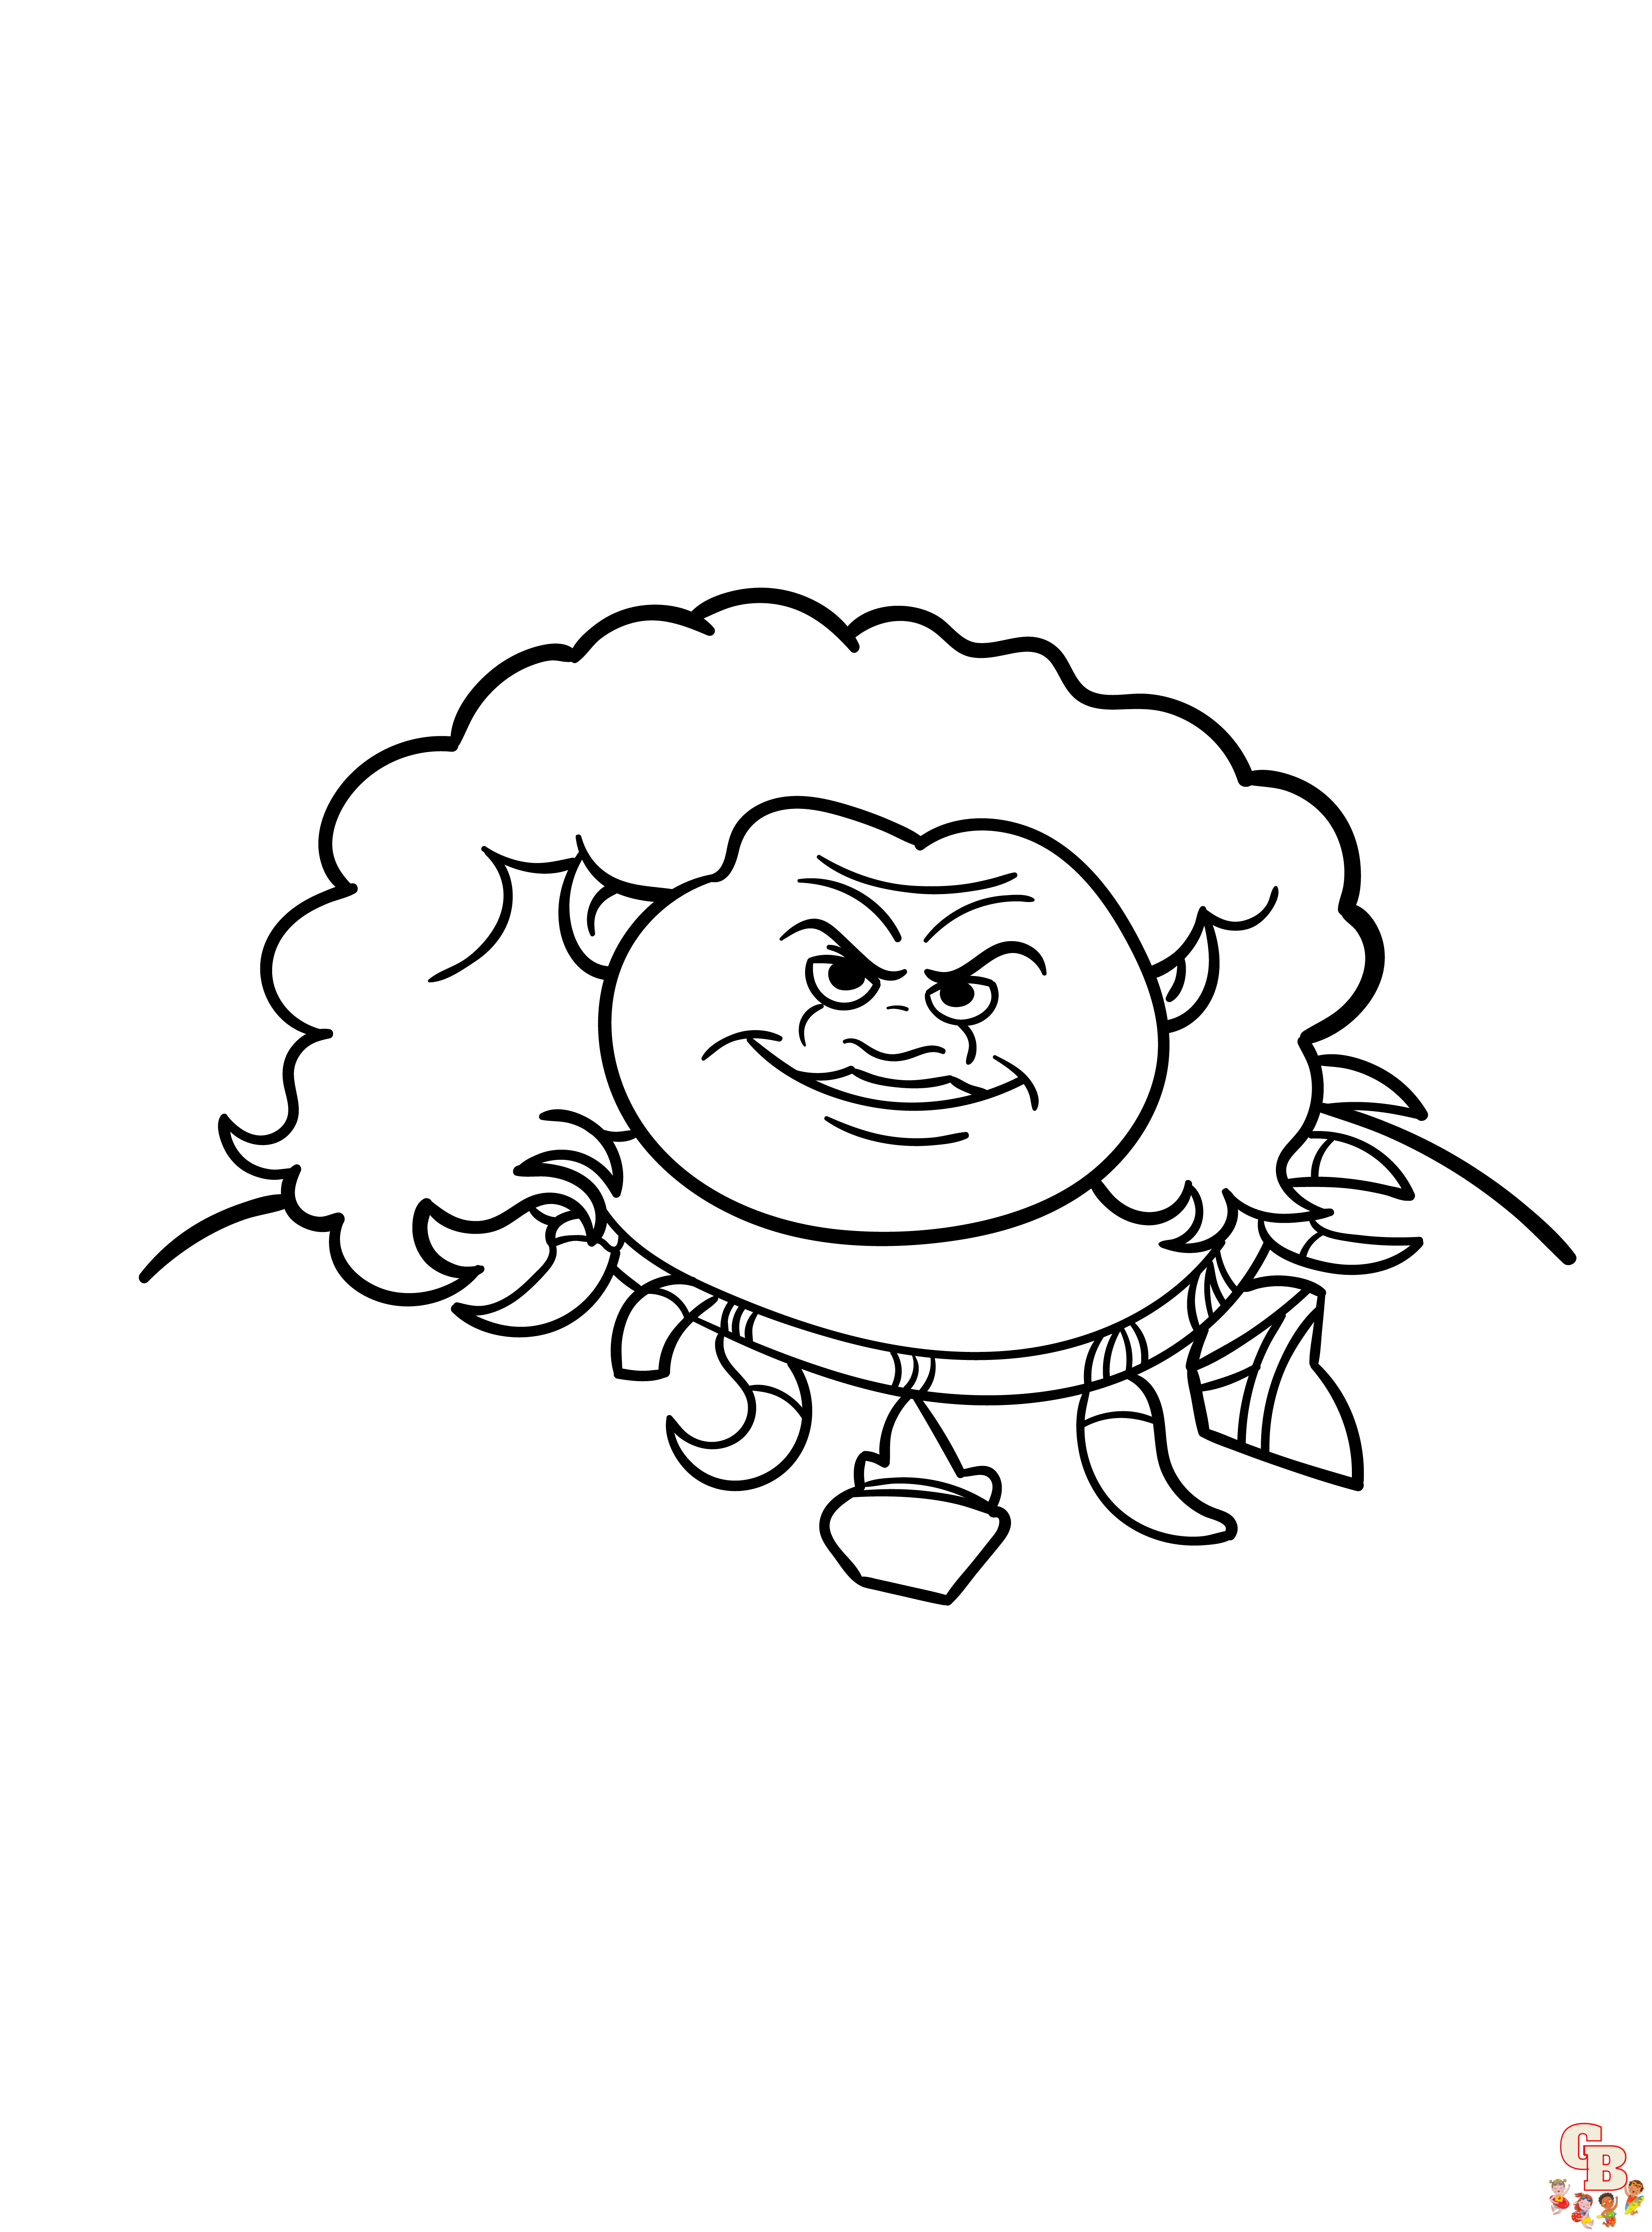 Maui From Moana coloring pages 2 1